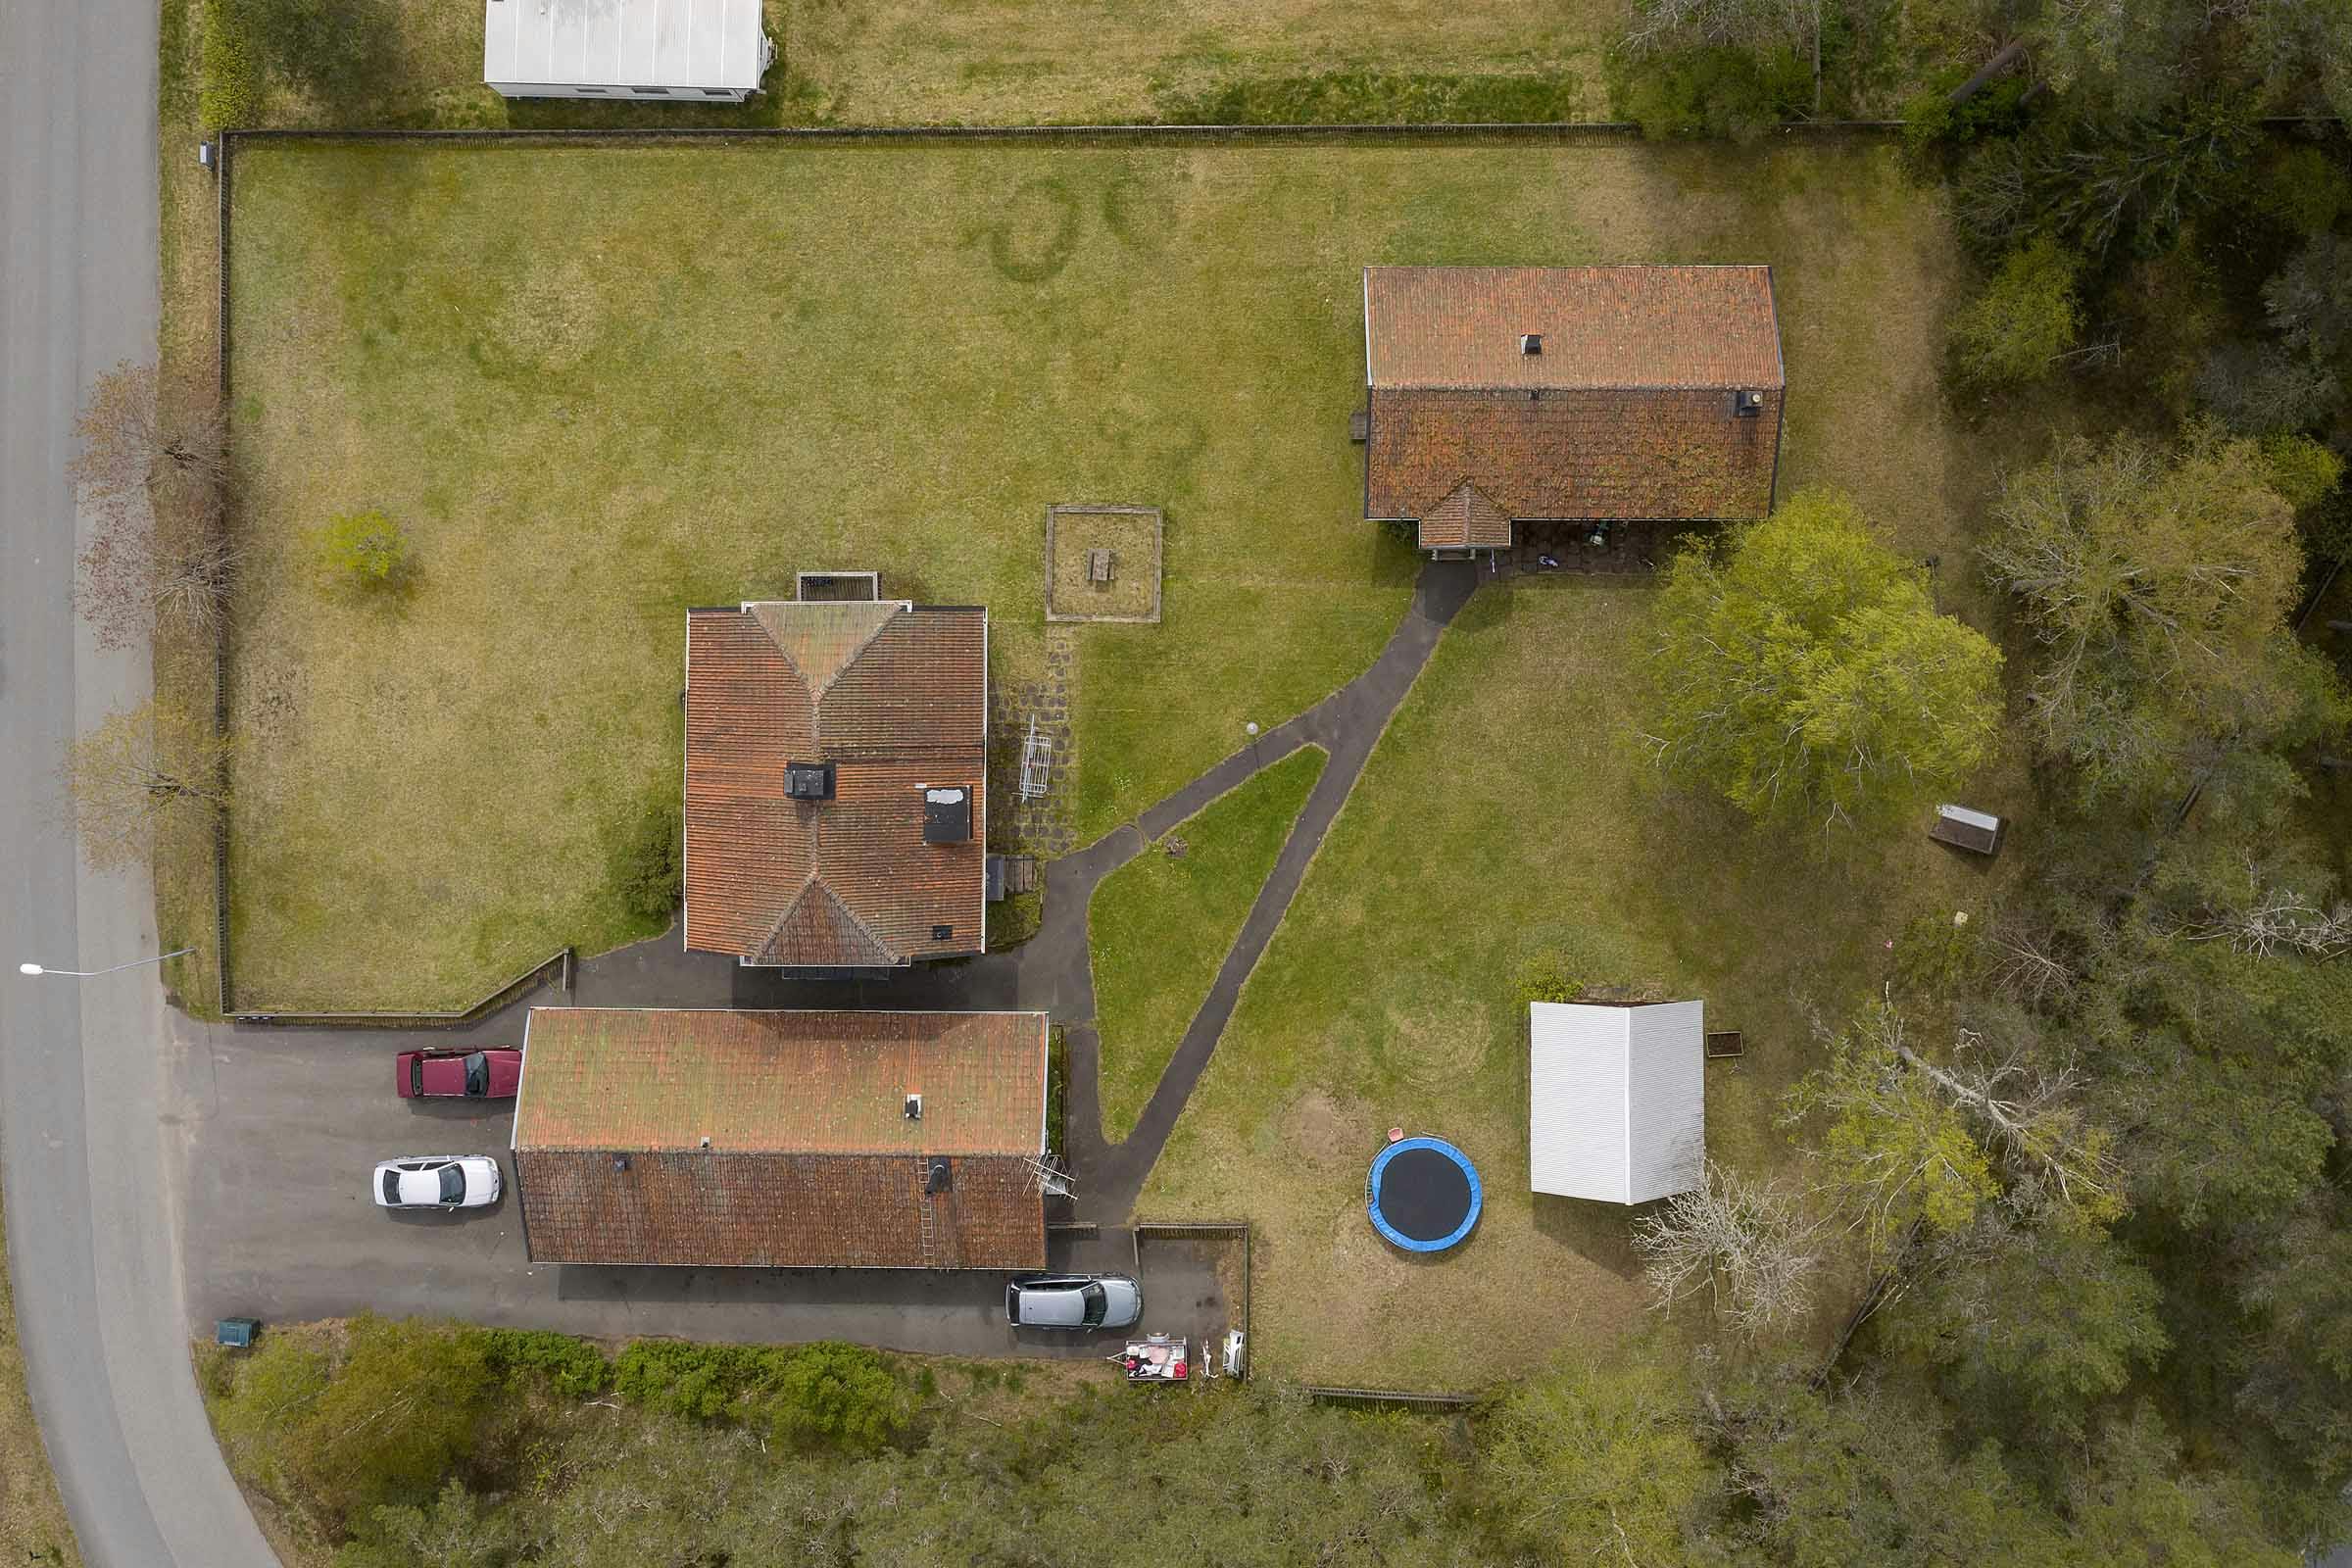 Drone photograph of 3 houses